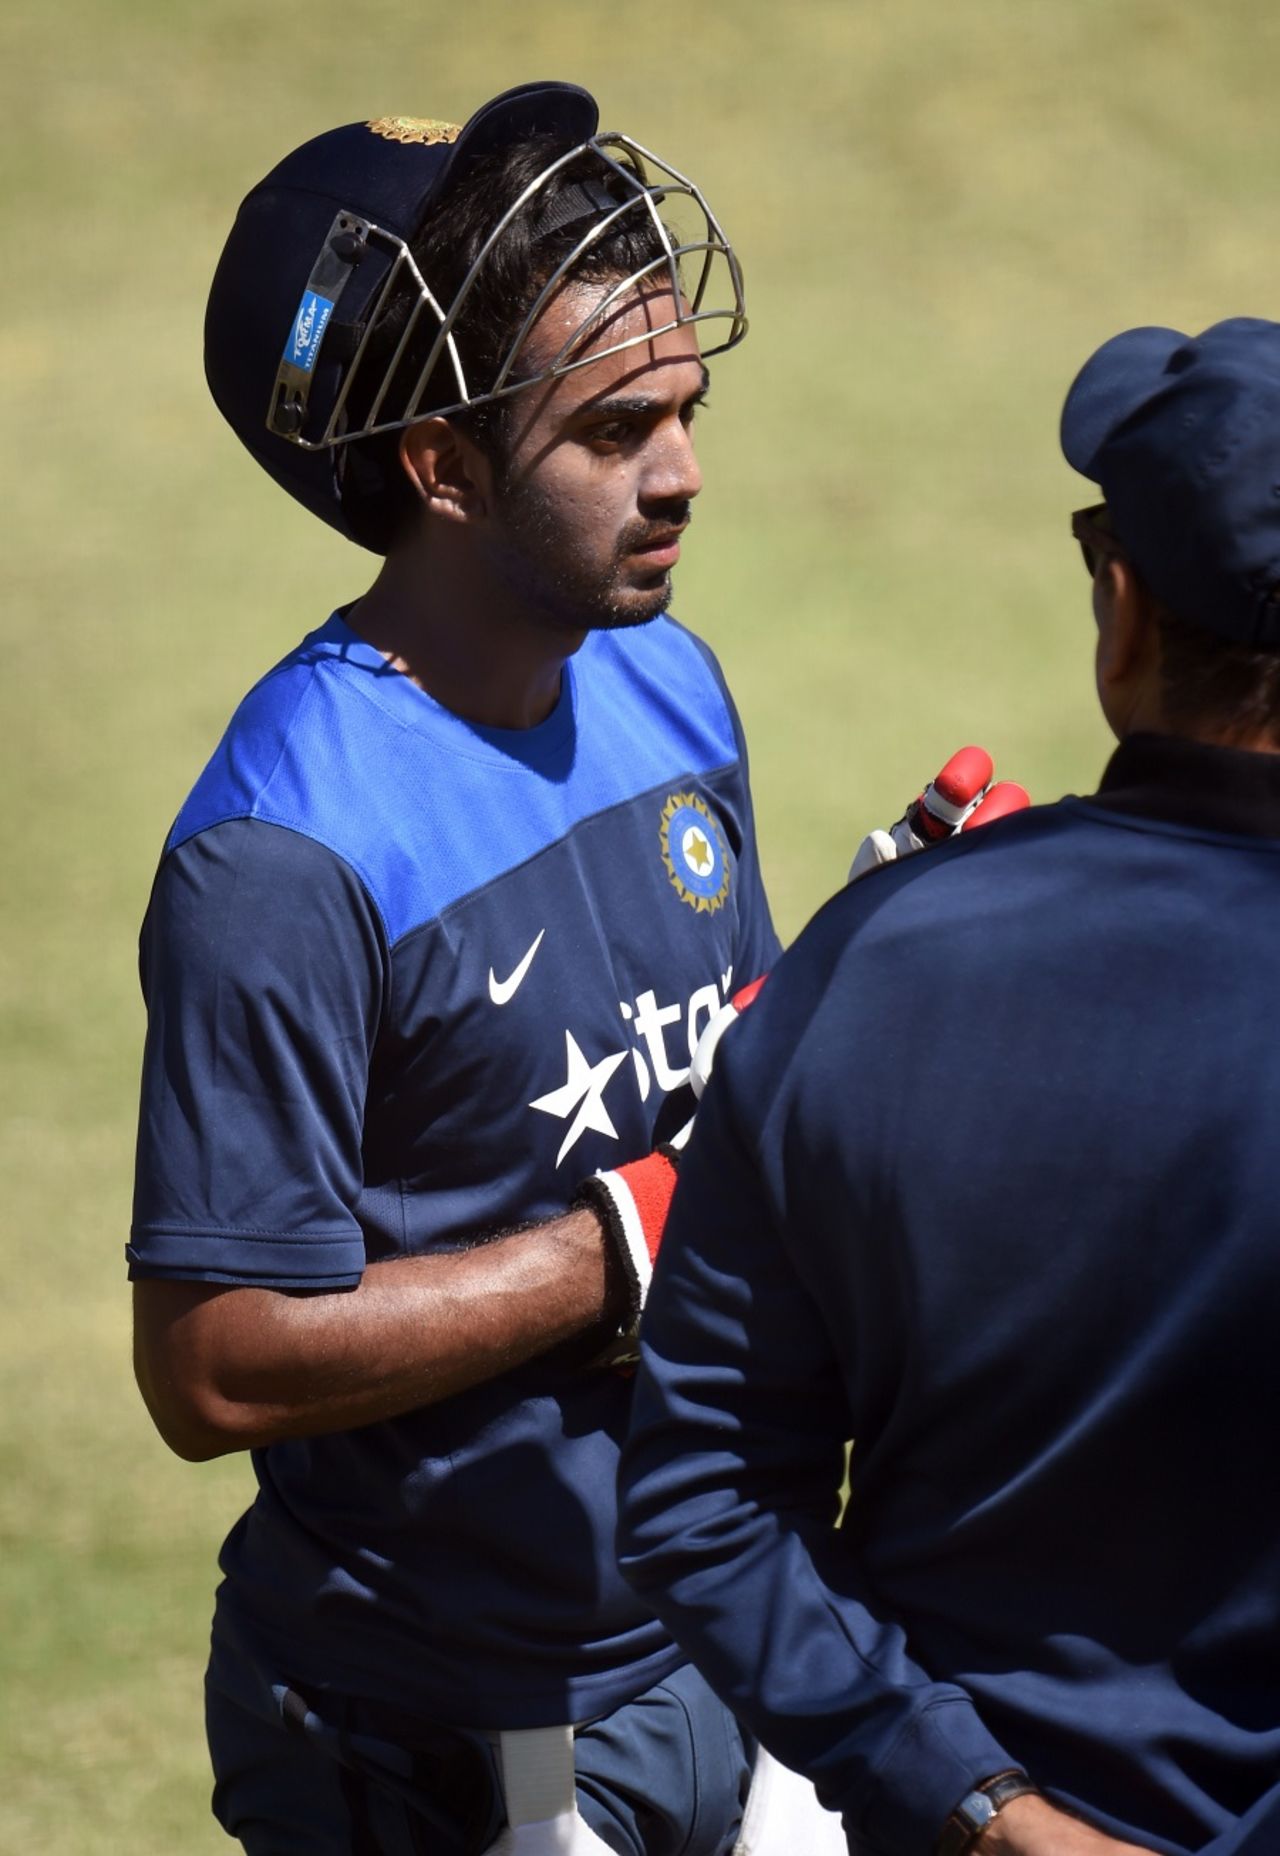 KL Rahul was given an extended hit at training, Australia v India, 3rd Test, Melbourne, December 25, 2014